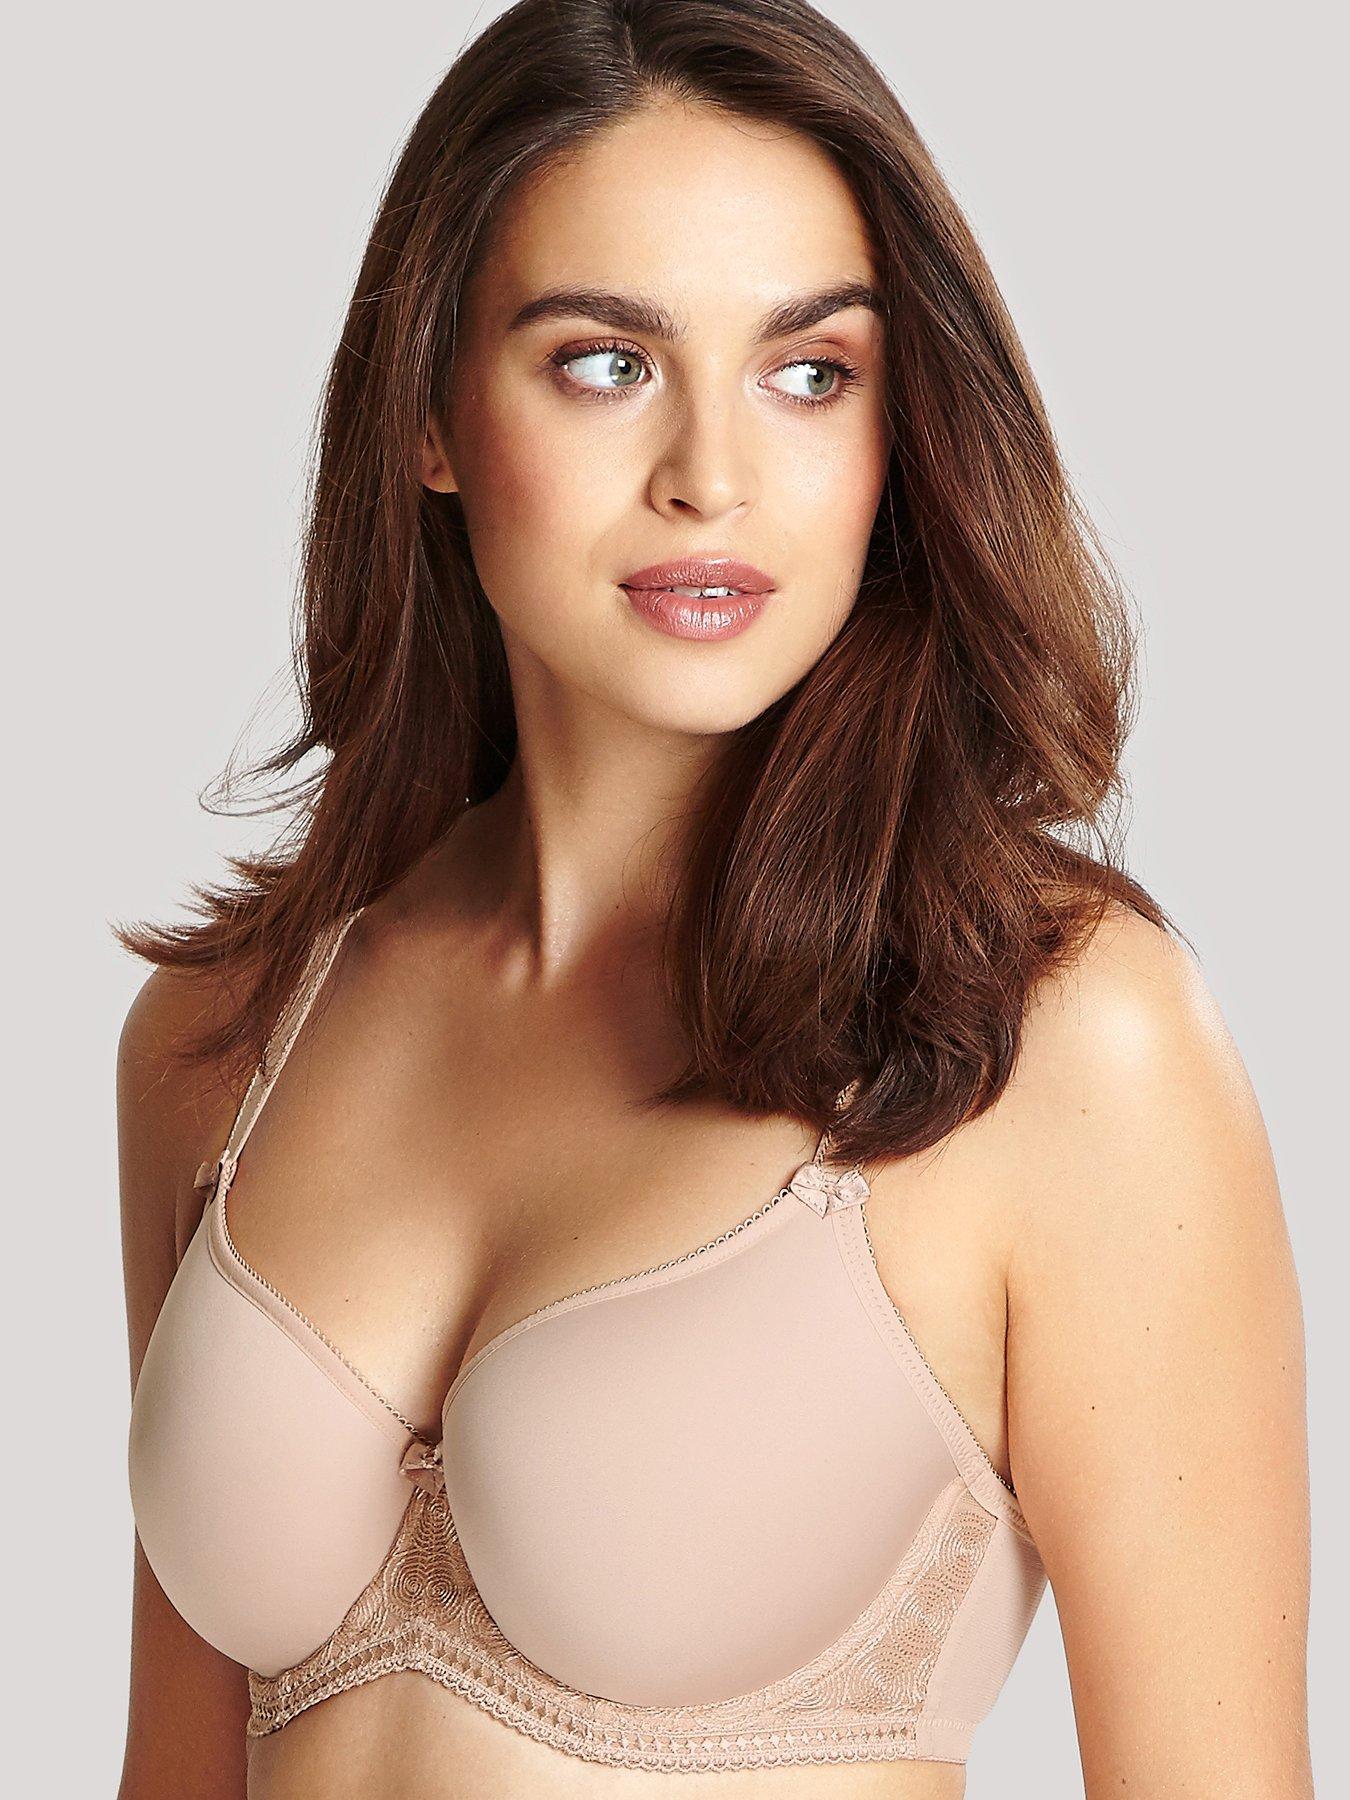 Underwire in 28E Bra Size E Cup Sizes Caramel J-Hook, Lace Cup and Spacer  Bras